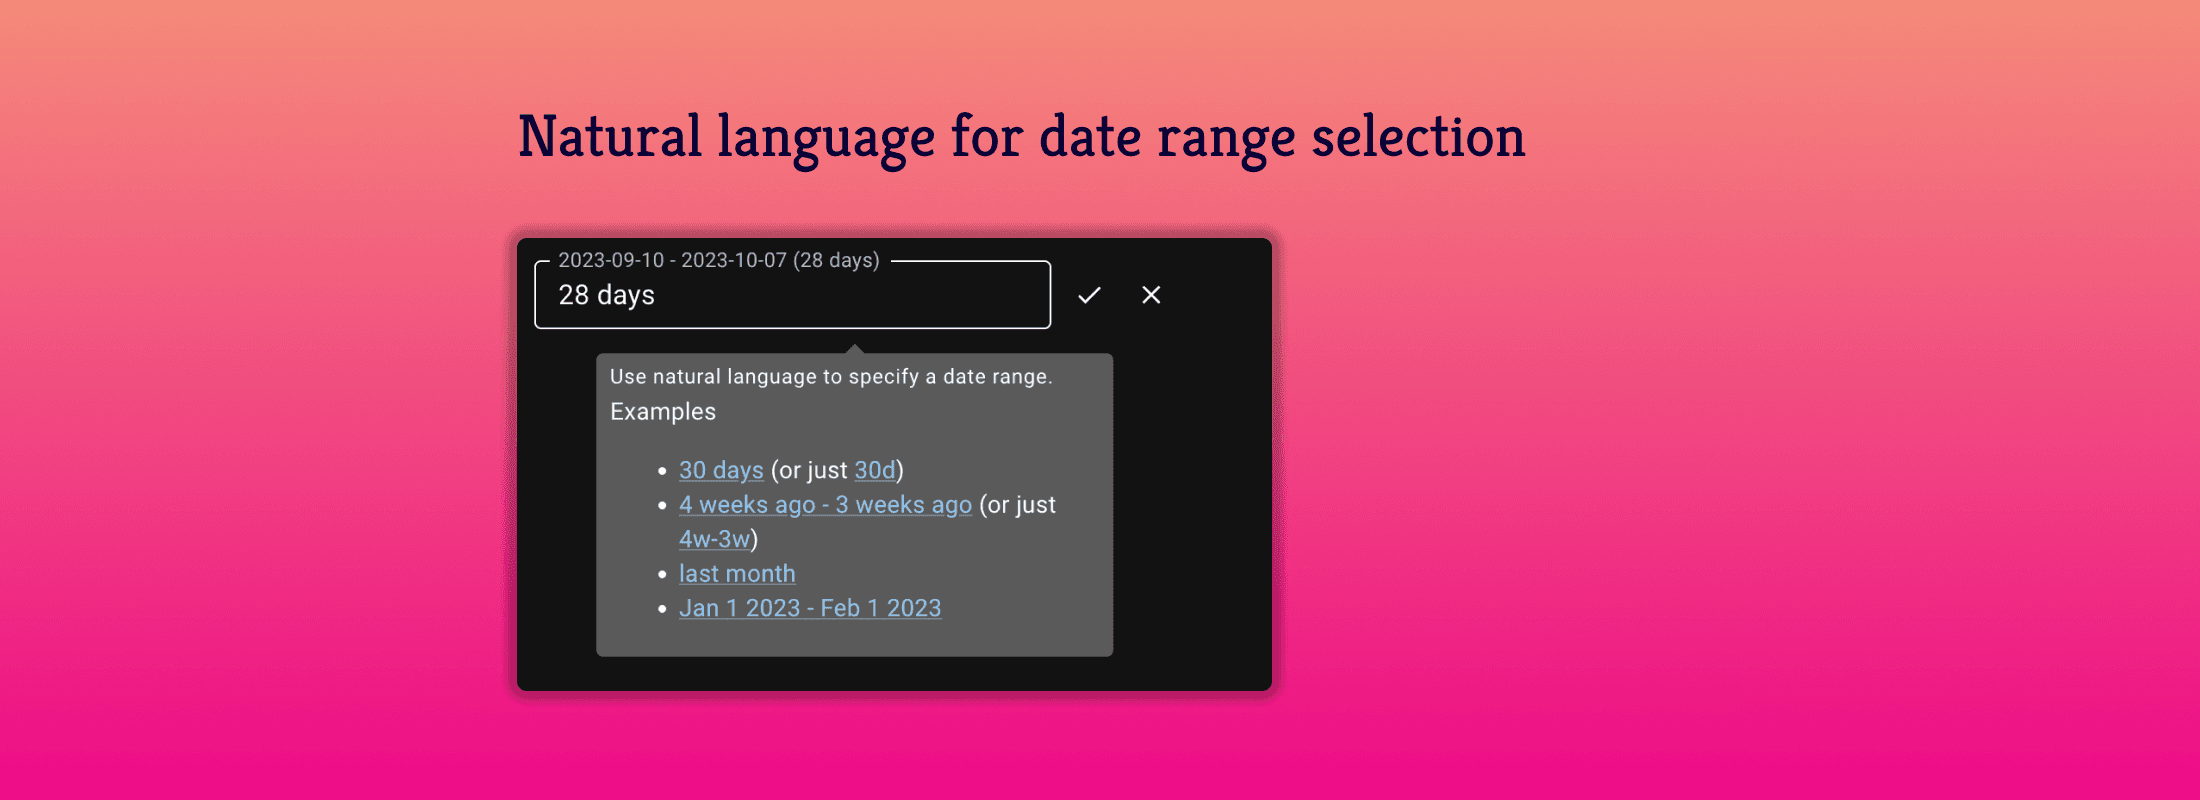 Natural language for date range selection